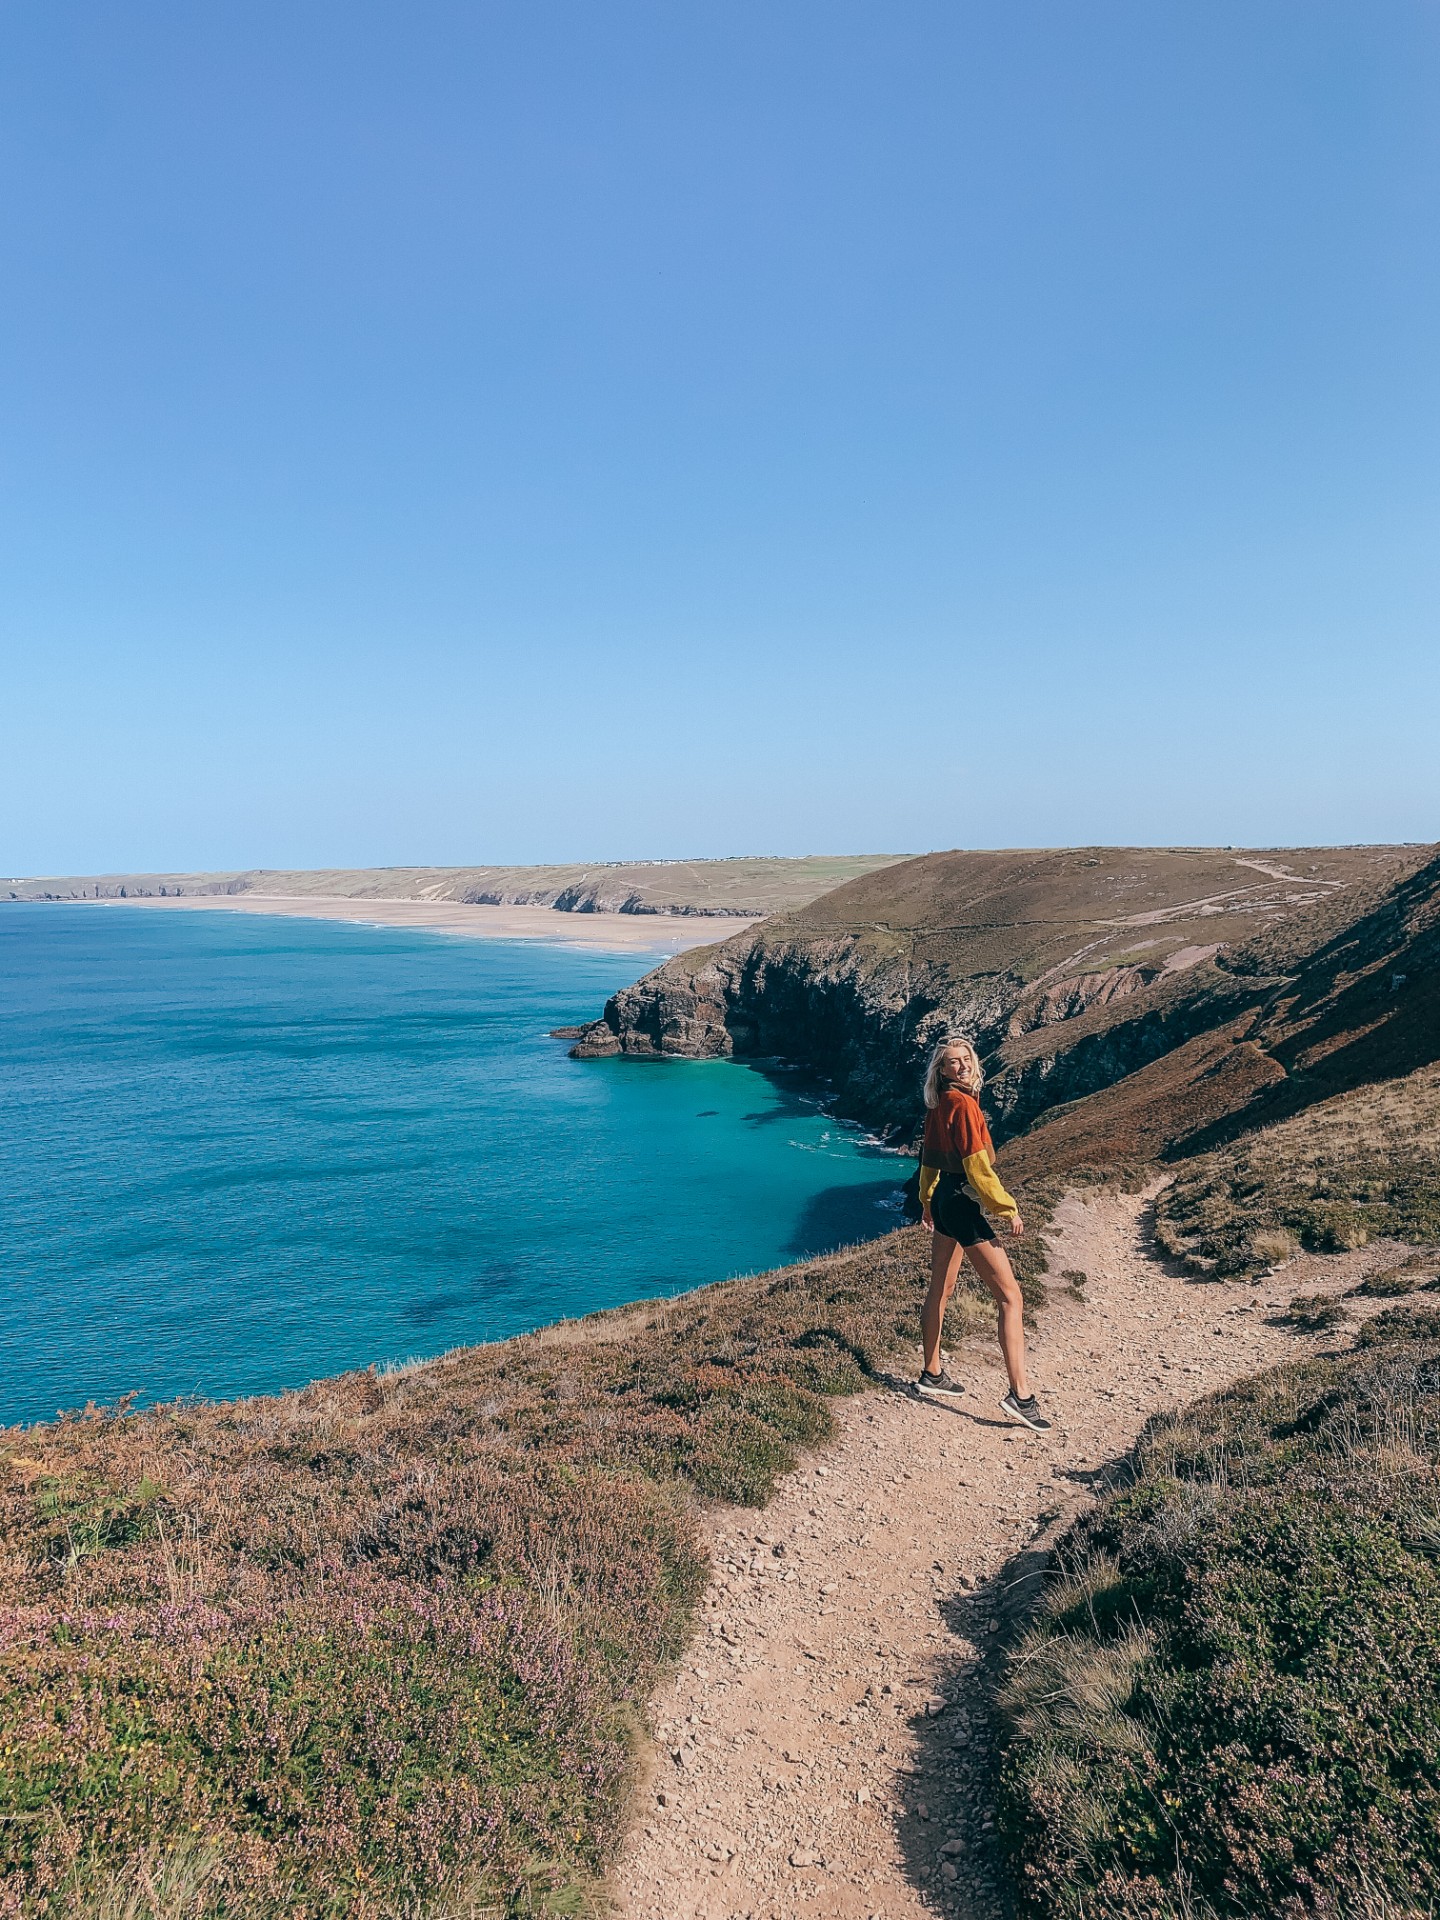 best uk staycation ideas - cornwall for the beautiful beaches and rugged seascapes
